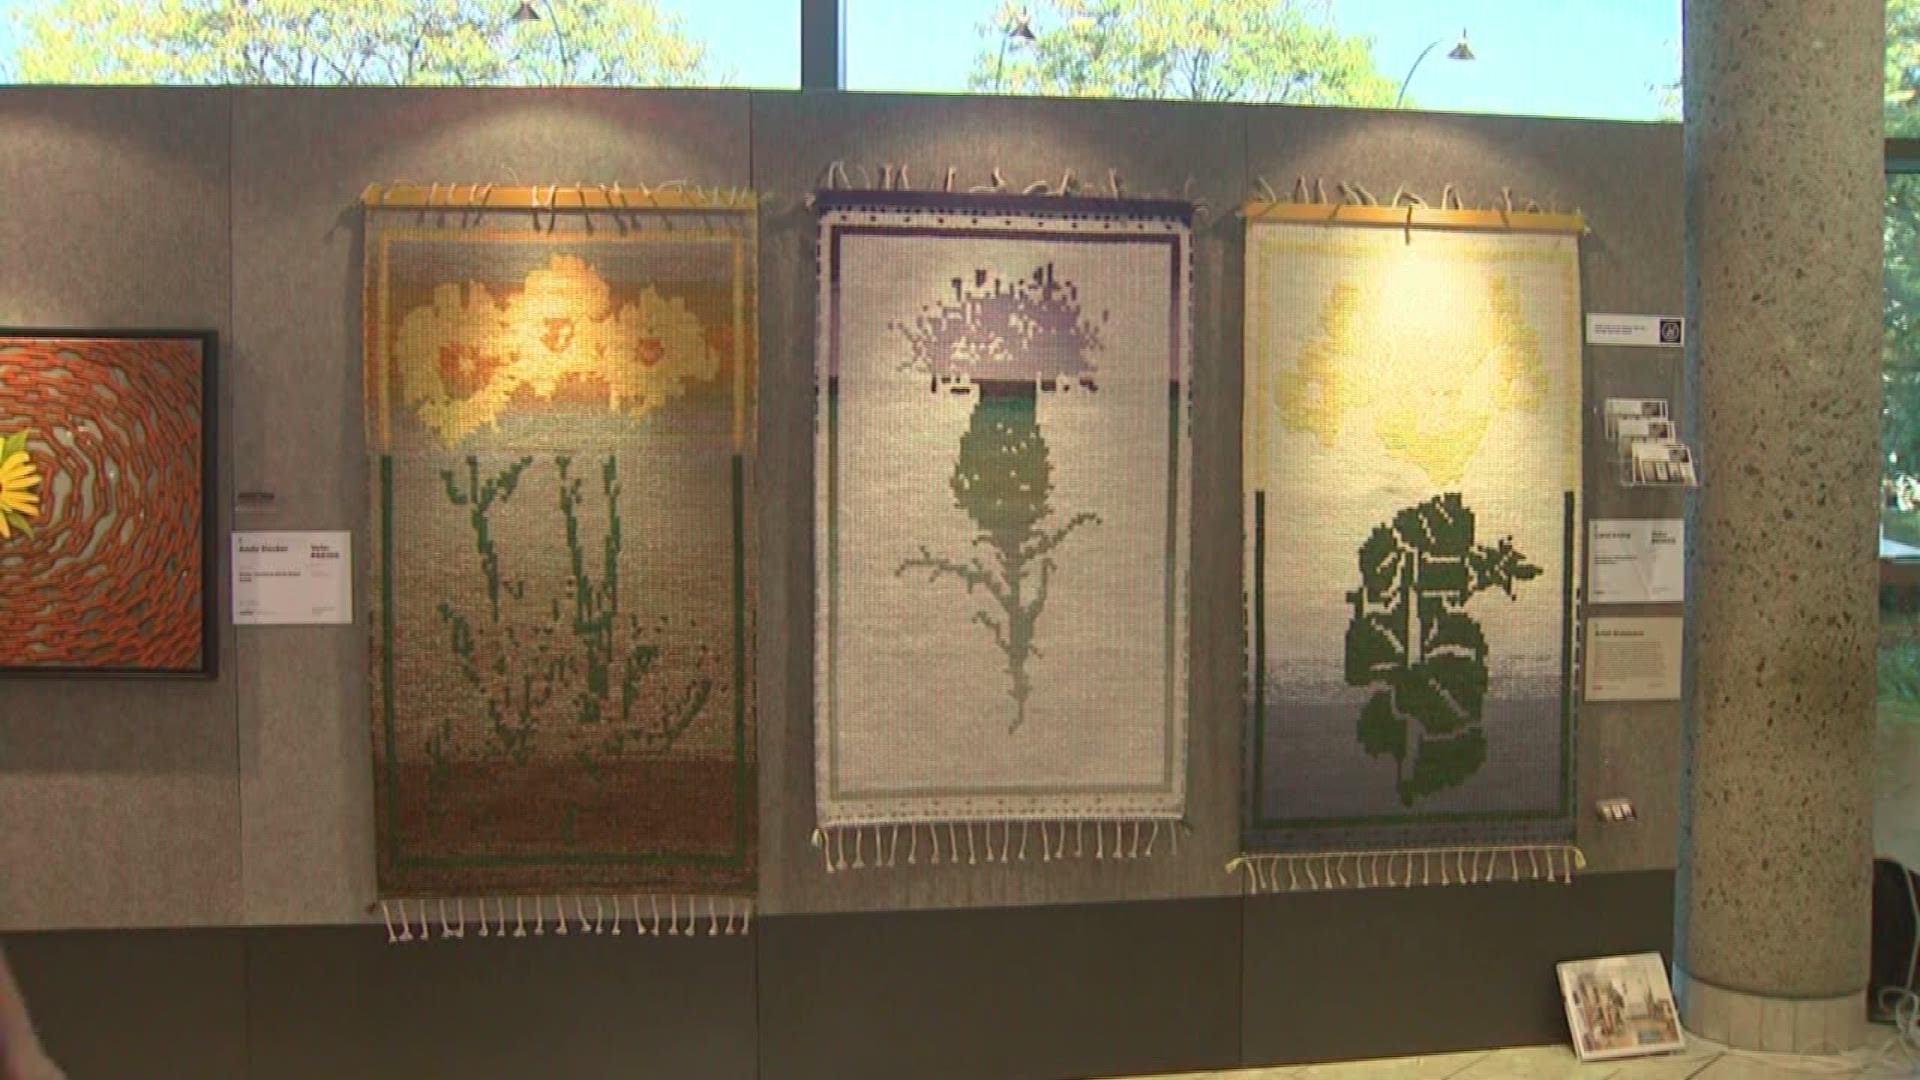 Michigan's Endanger Wildflower gets coveted spot at ArtPrize